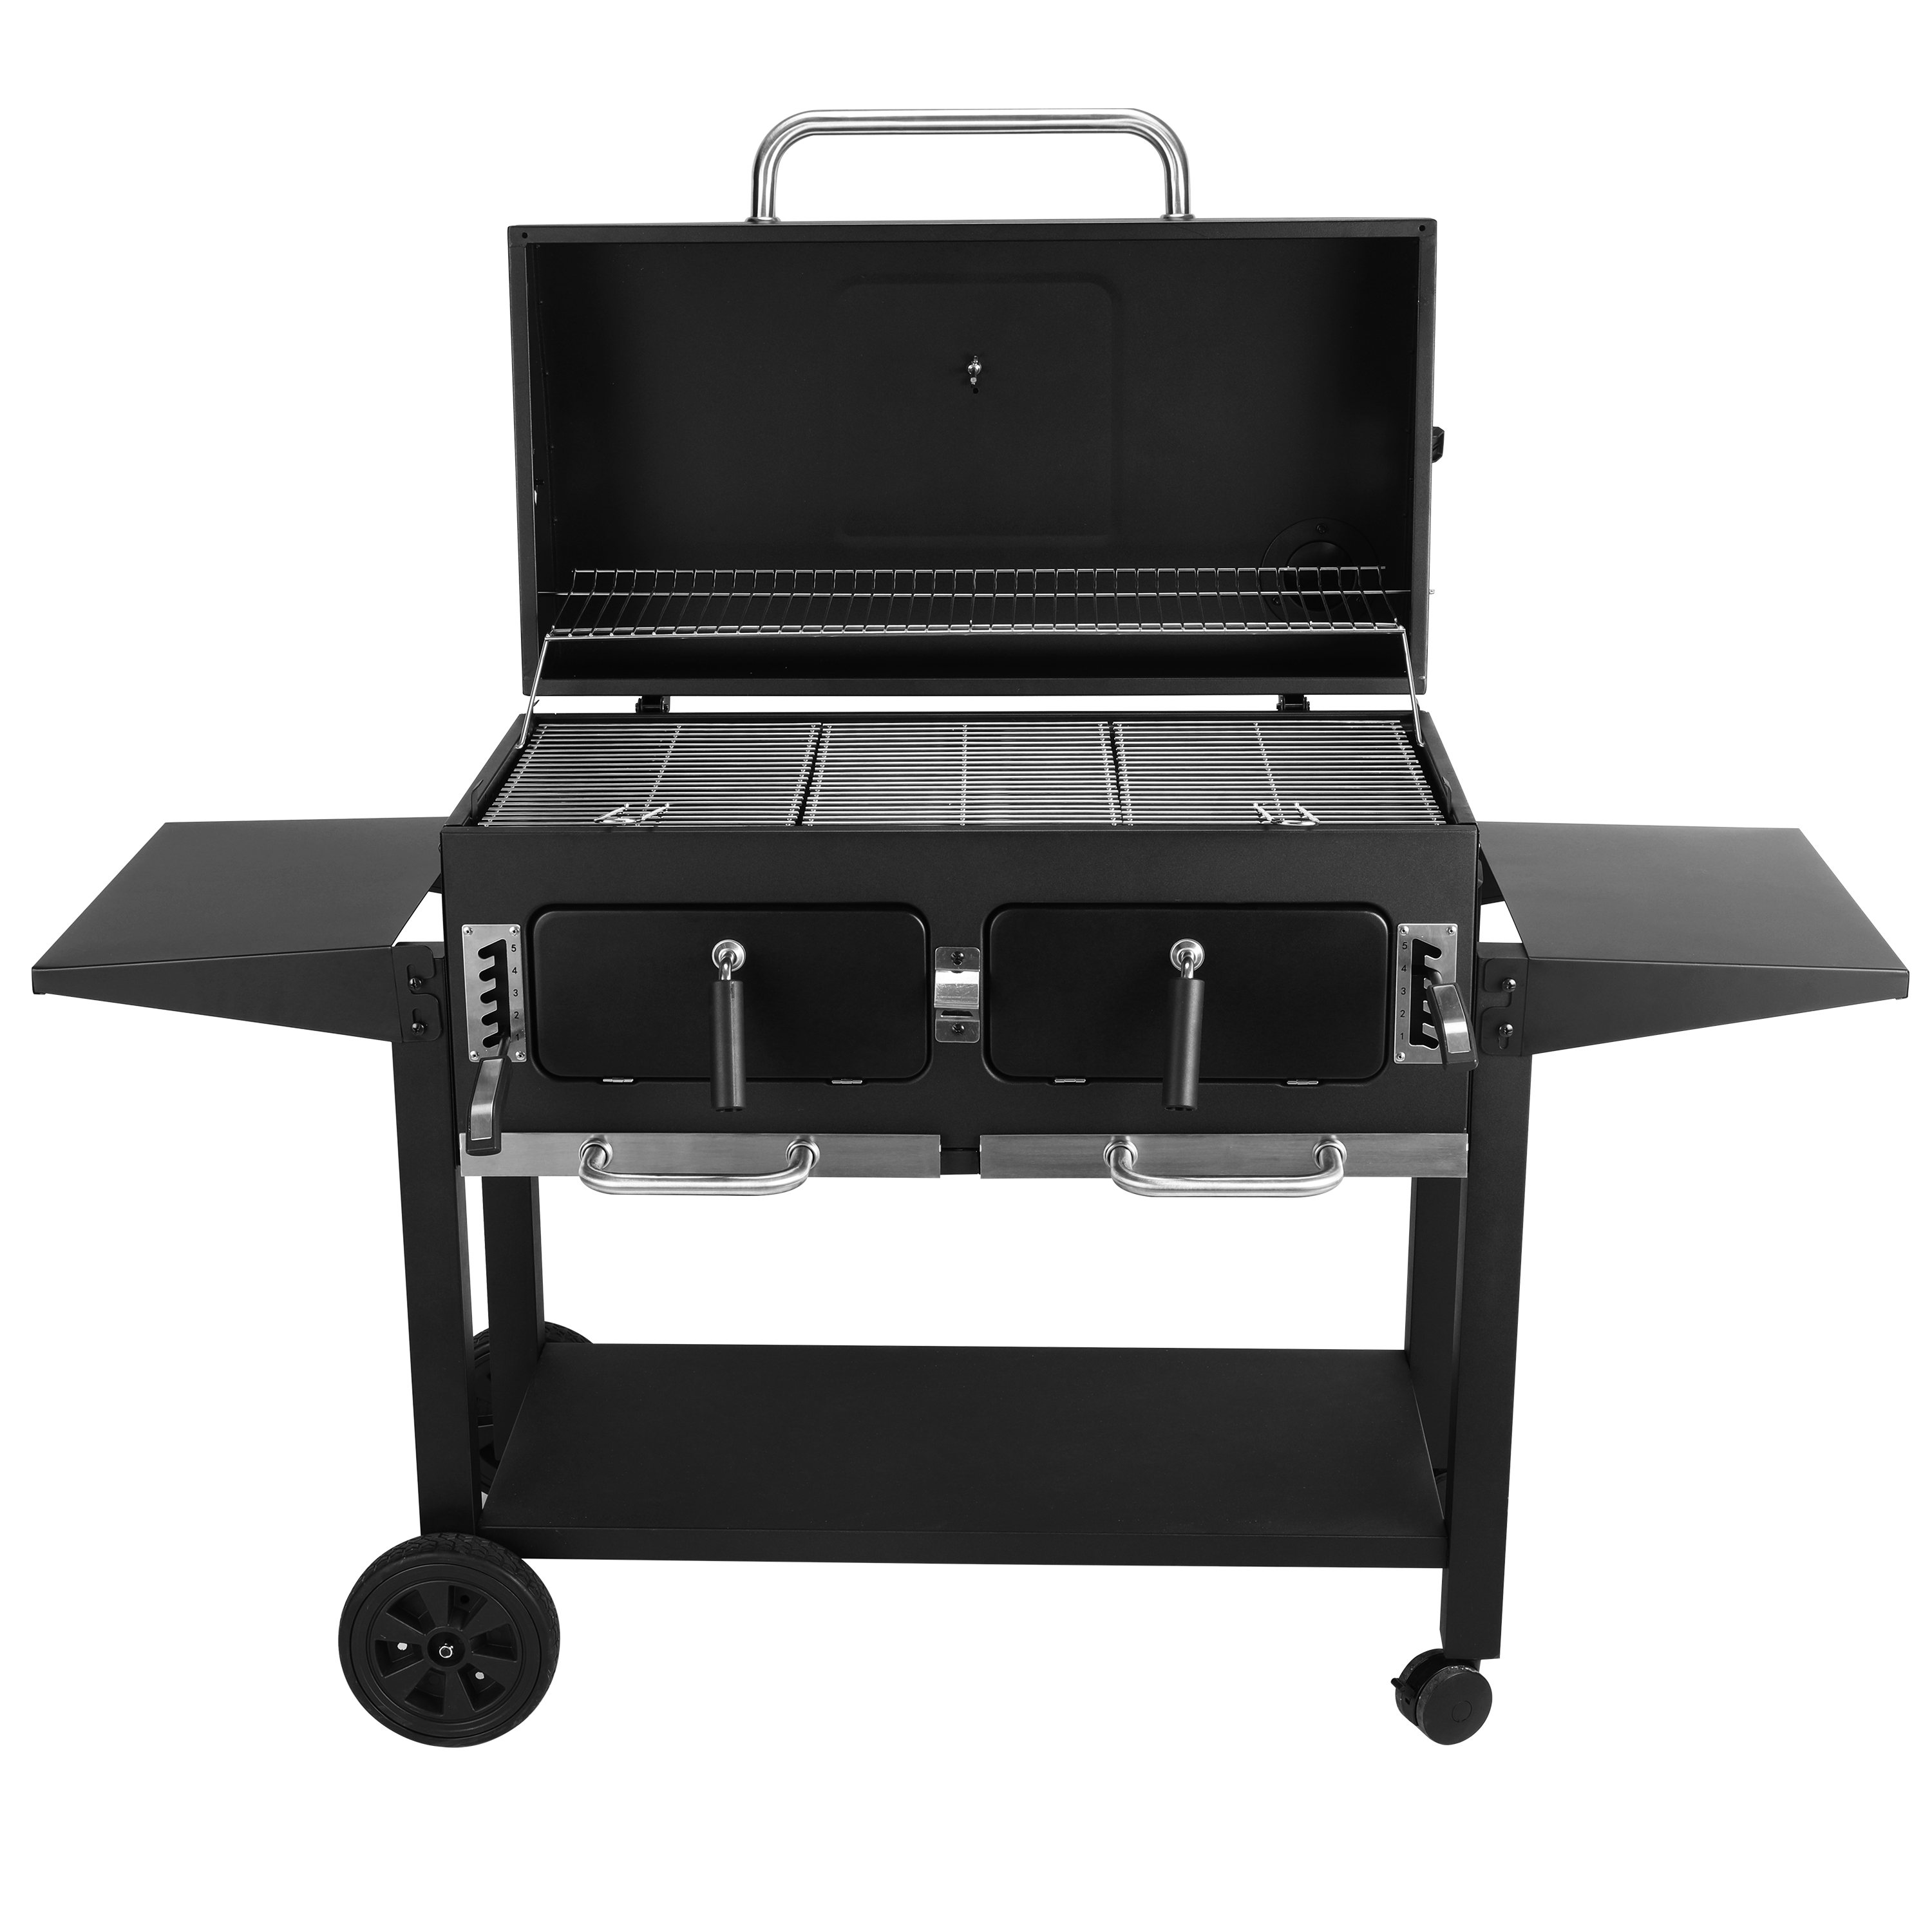 KING SIZE CHARCOAL BARBECUE With 2 independent burners